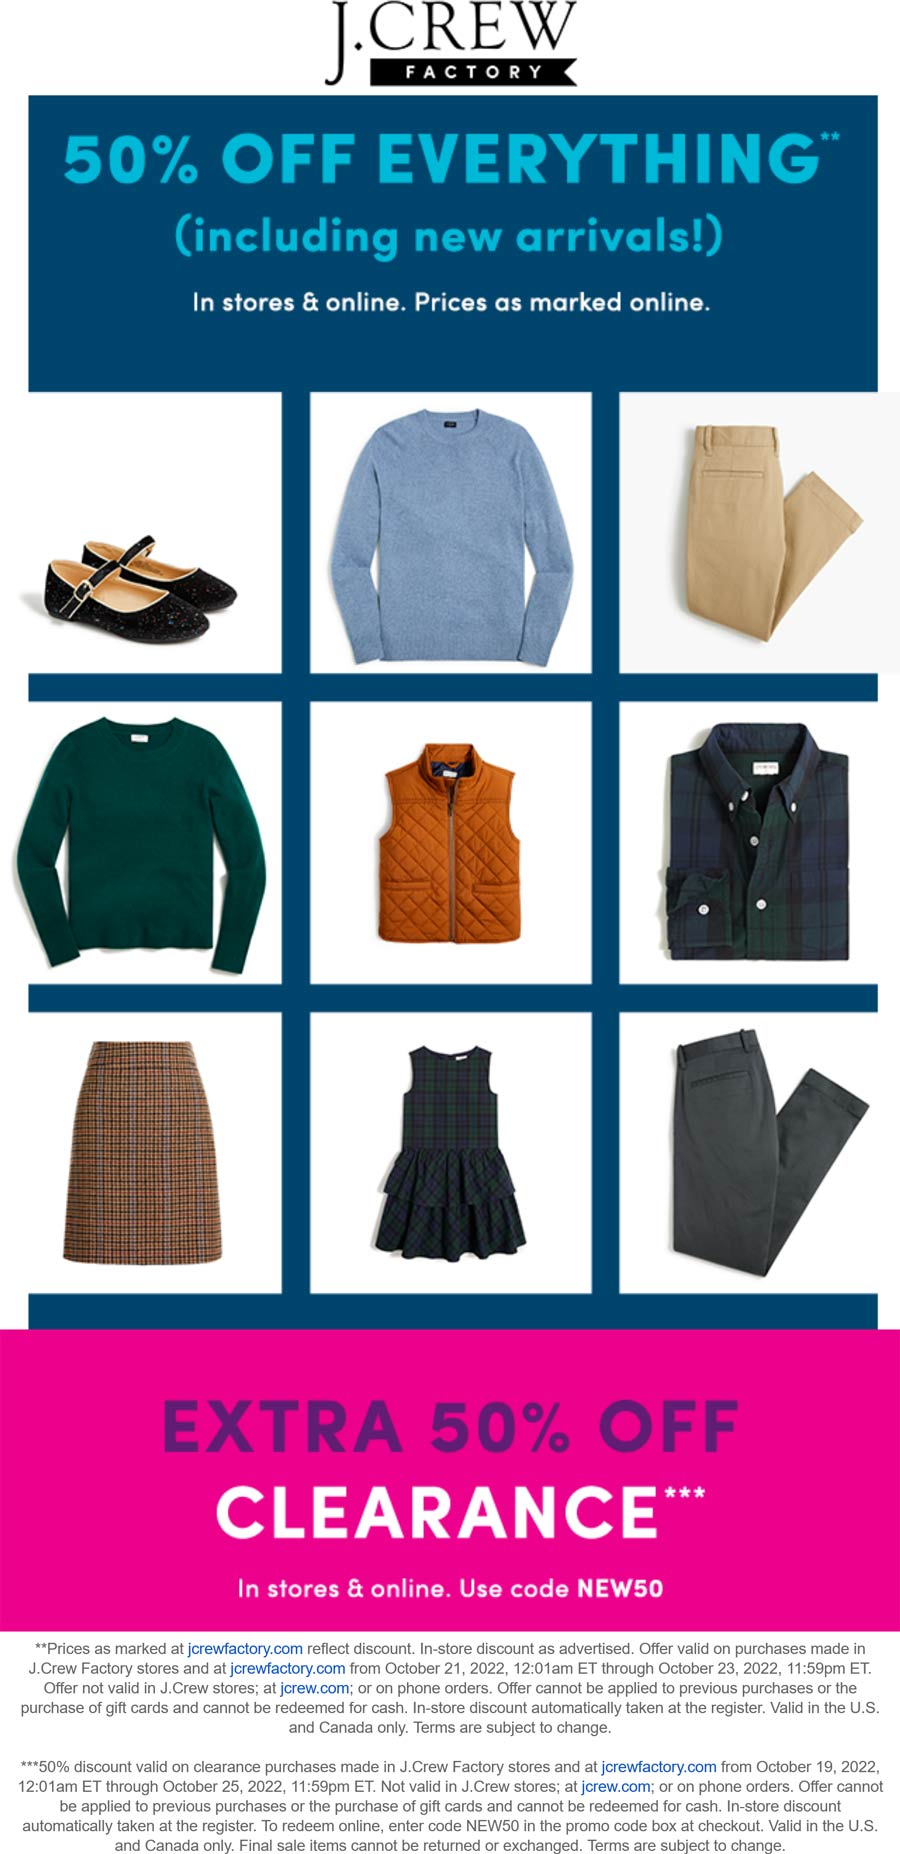 J.Crew Factory stores Coupon  50% off everything today at J.Crew Factory, or online via promo code NEW50 #jcrewfactory 